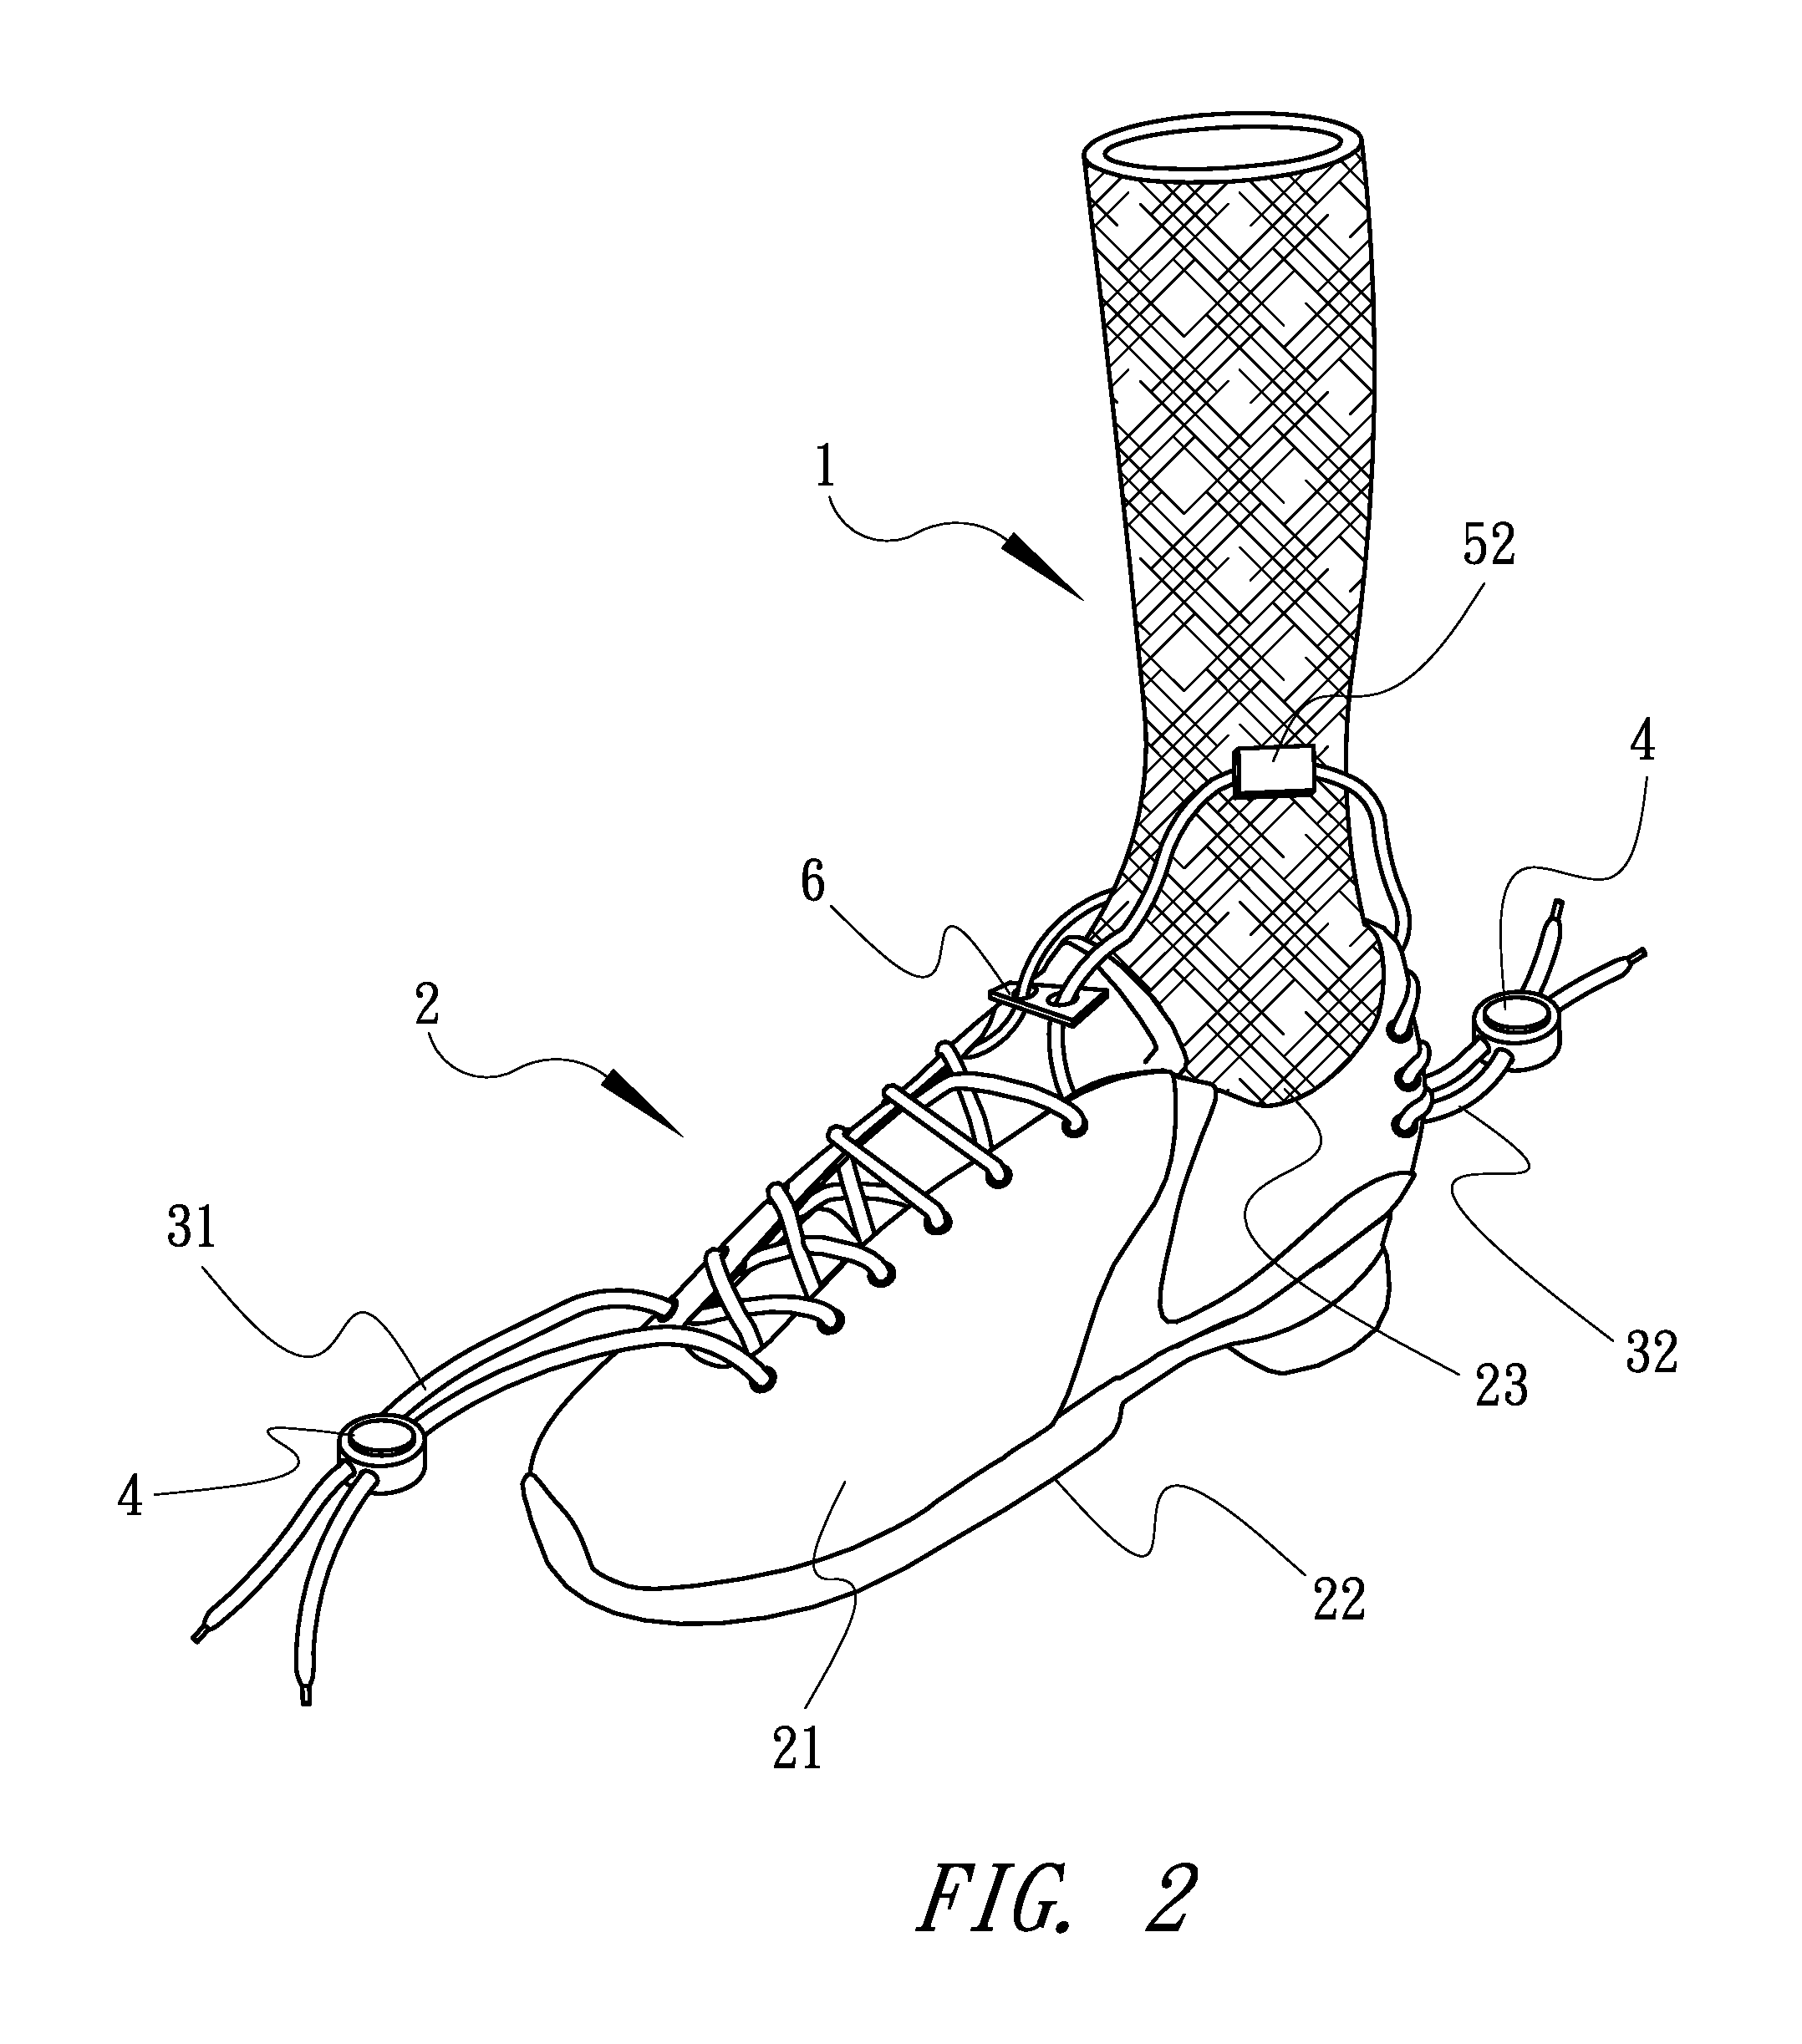 Shoes with socks which may have additional miniature stylish designs